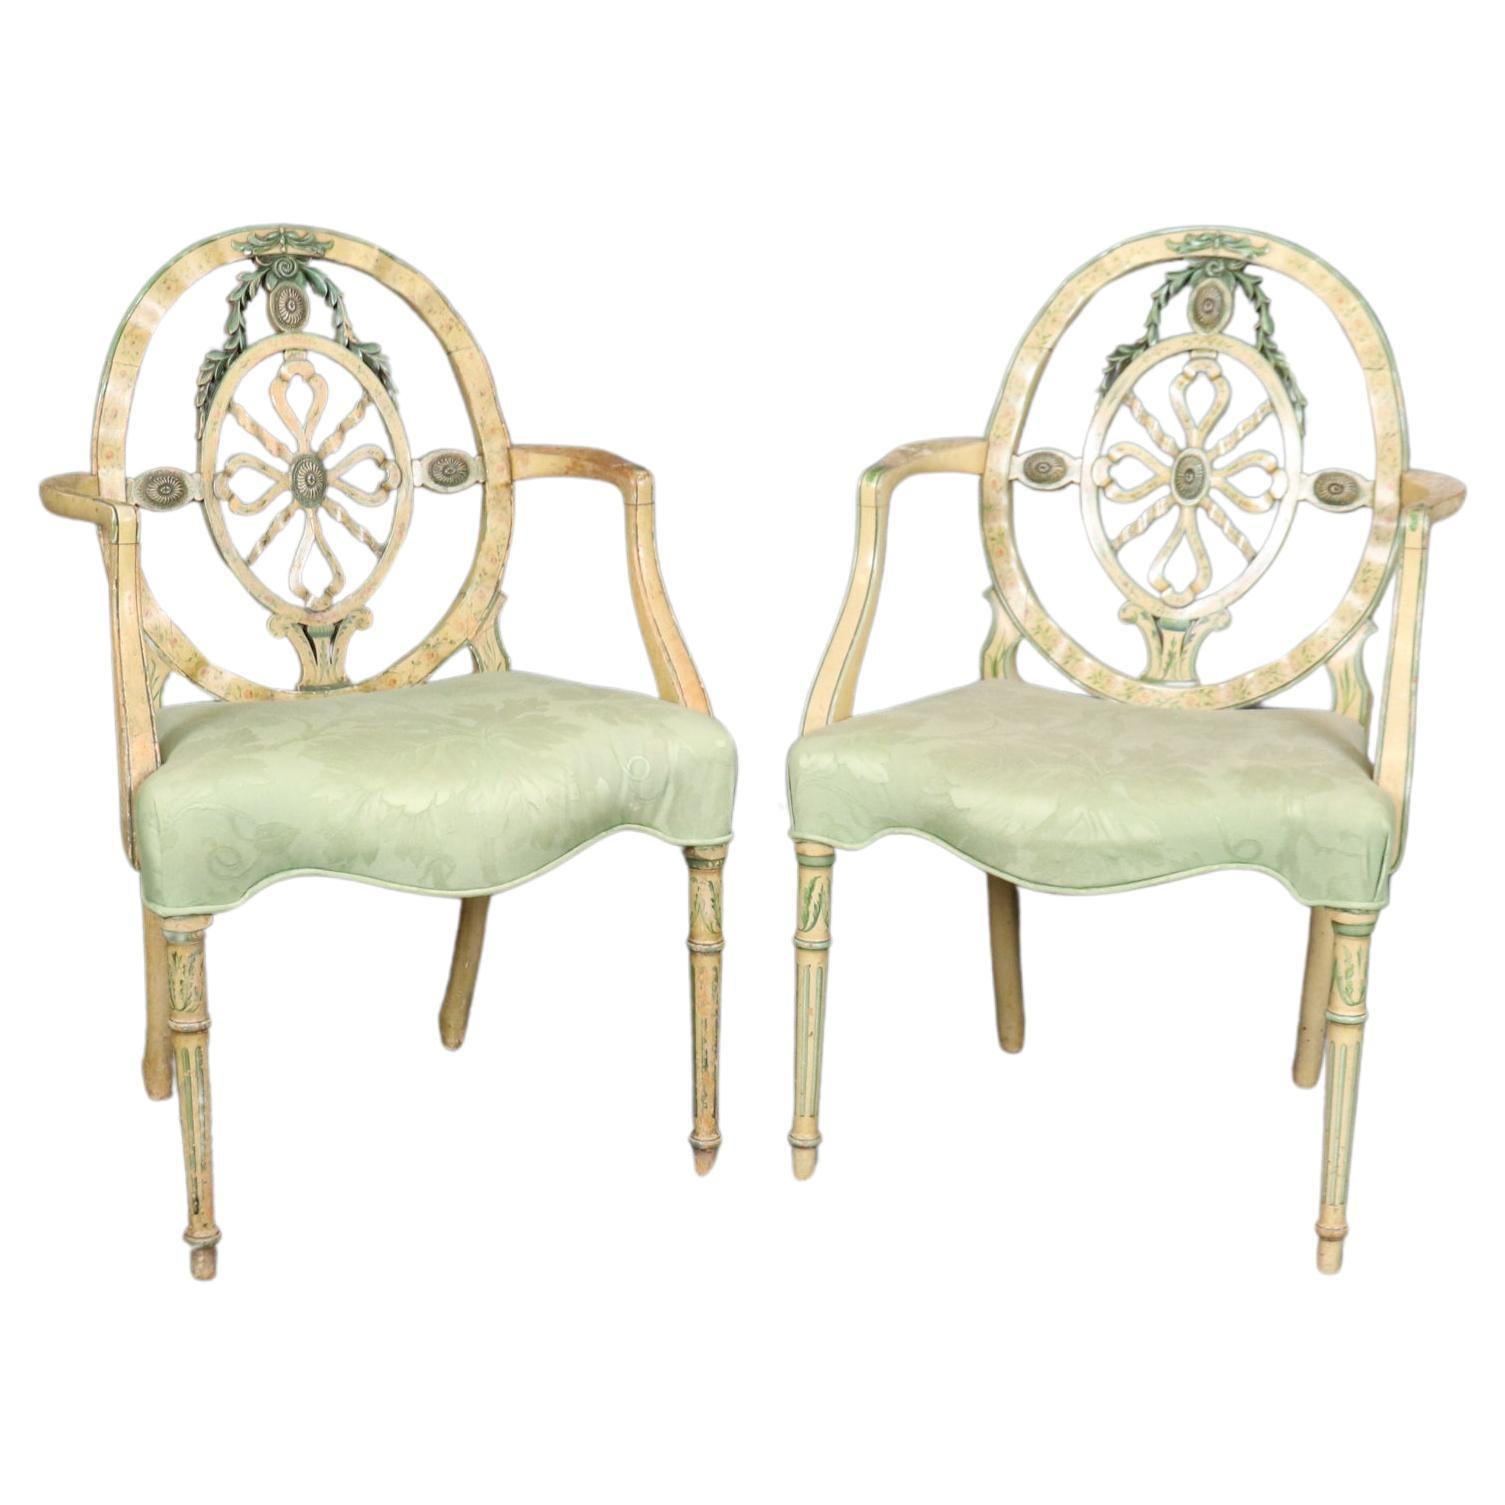 Pair of Gorgeous Adams Paint Decorated English Armchairs Circa 1930s For Sale